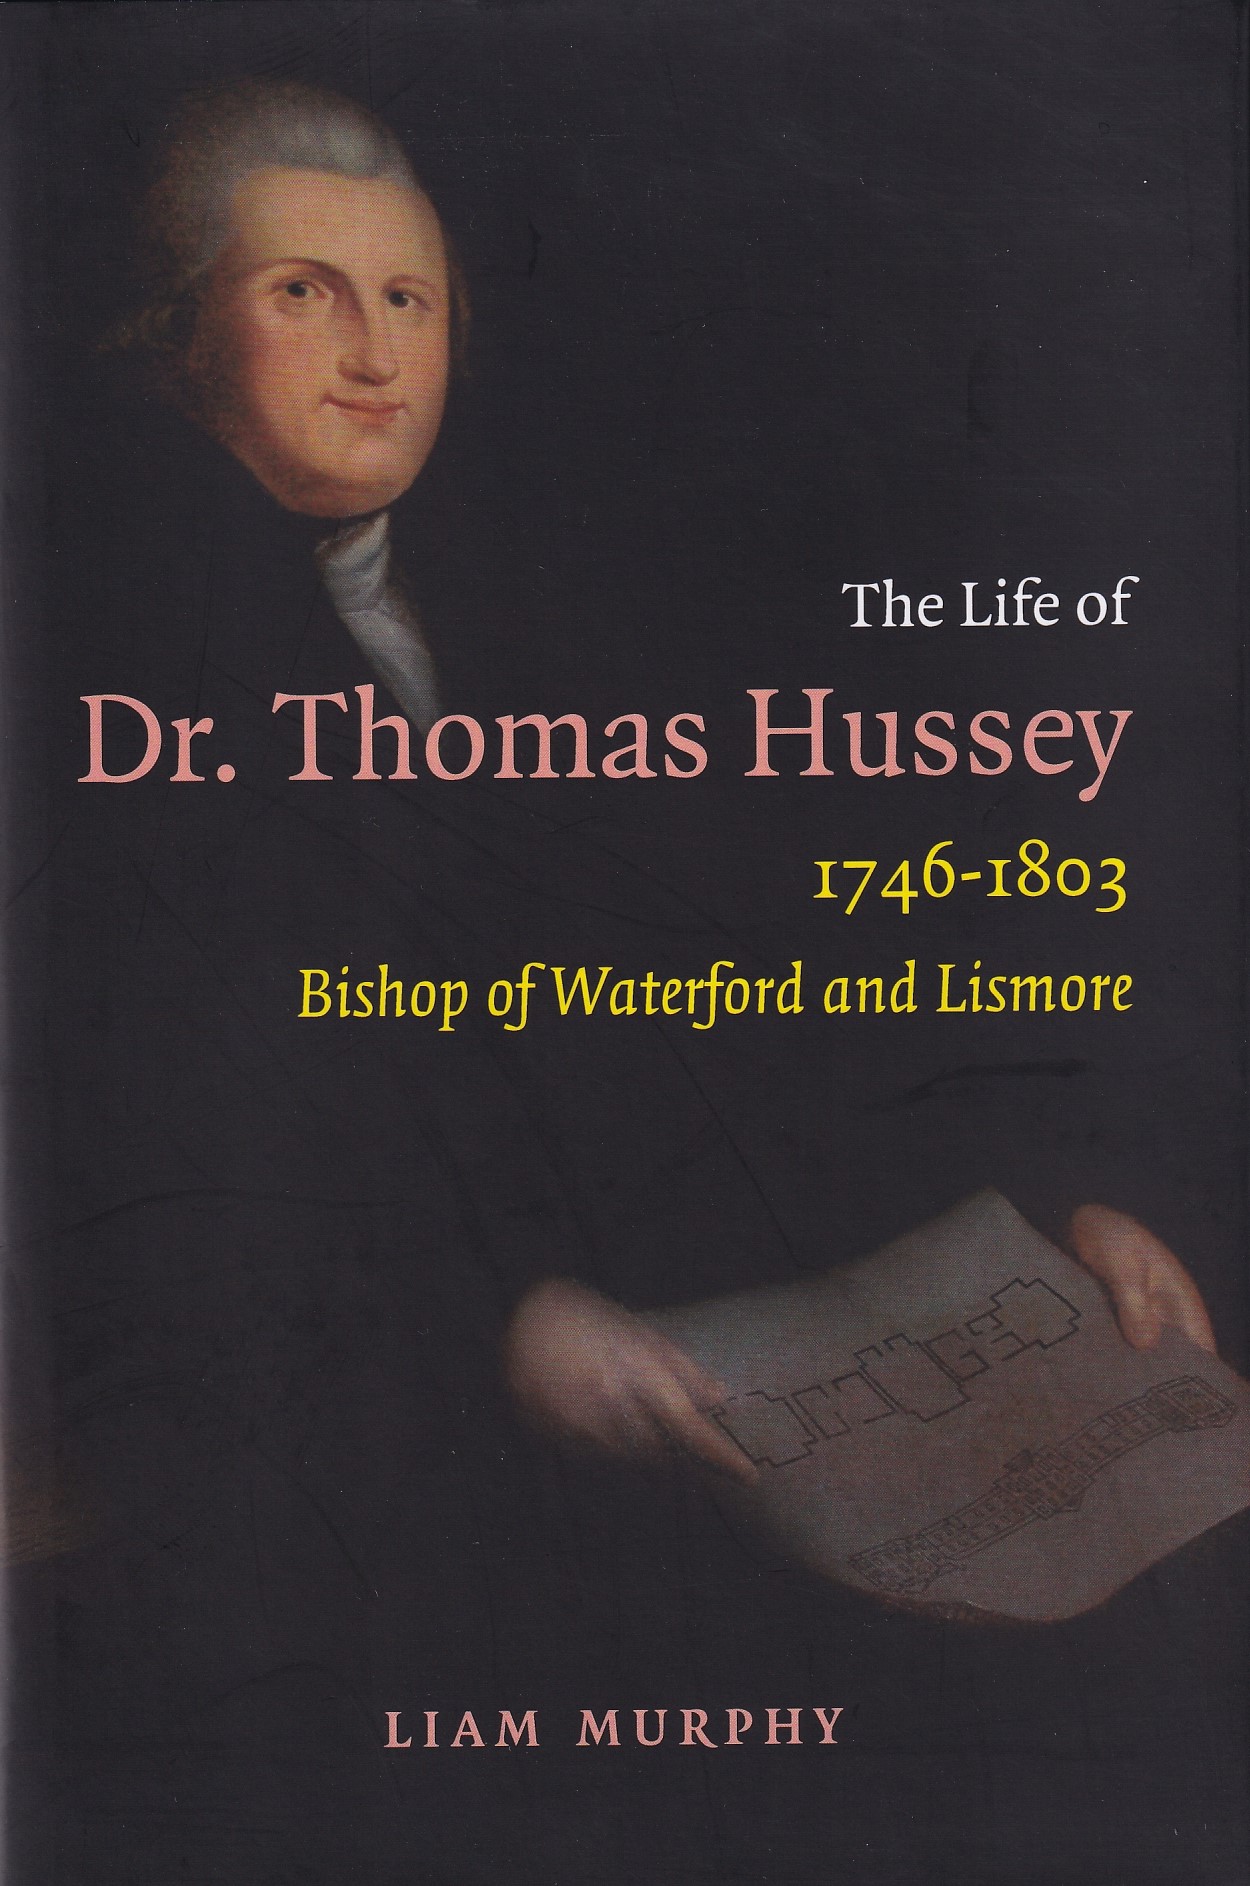 The Life of Dr. Thomas Hussey, 1746-1803: Bishop of Waterford and Lismore by Liam Murphy